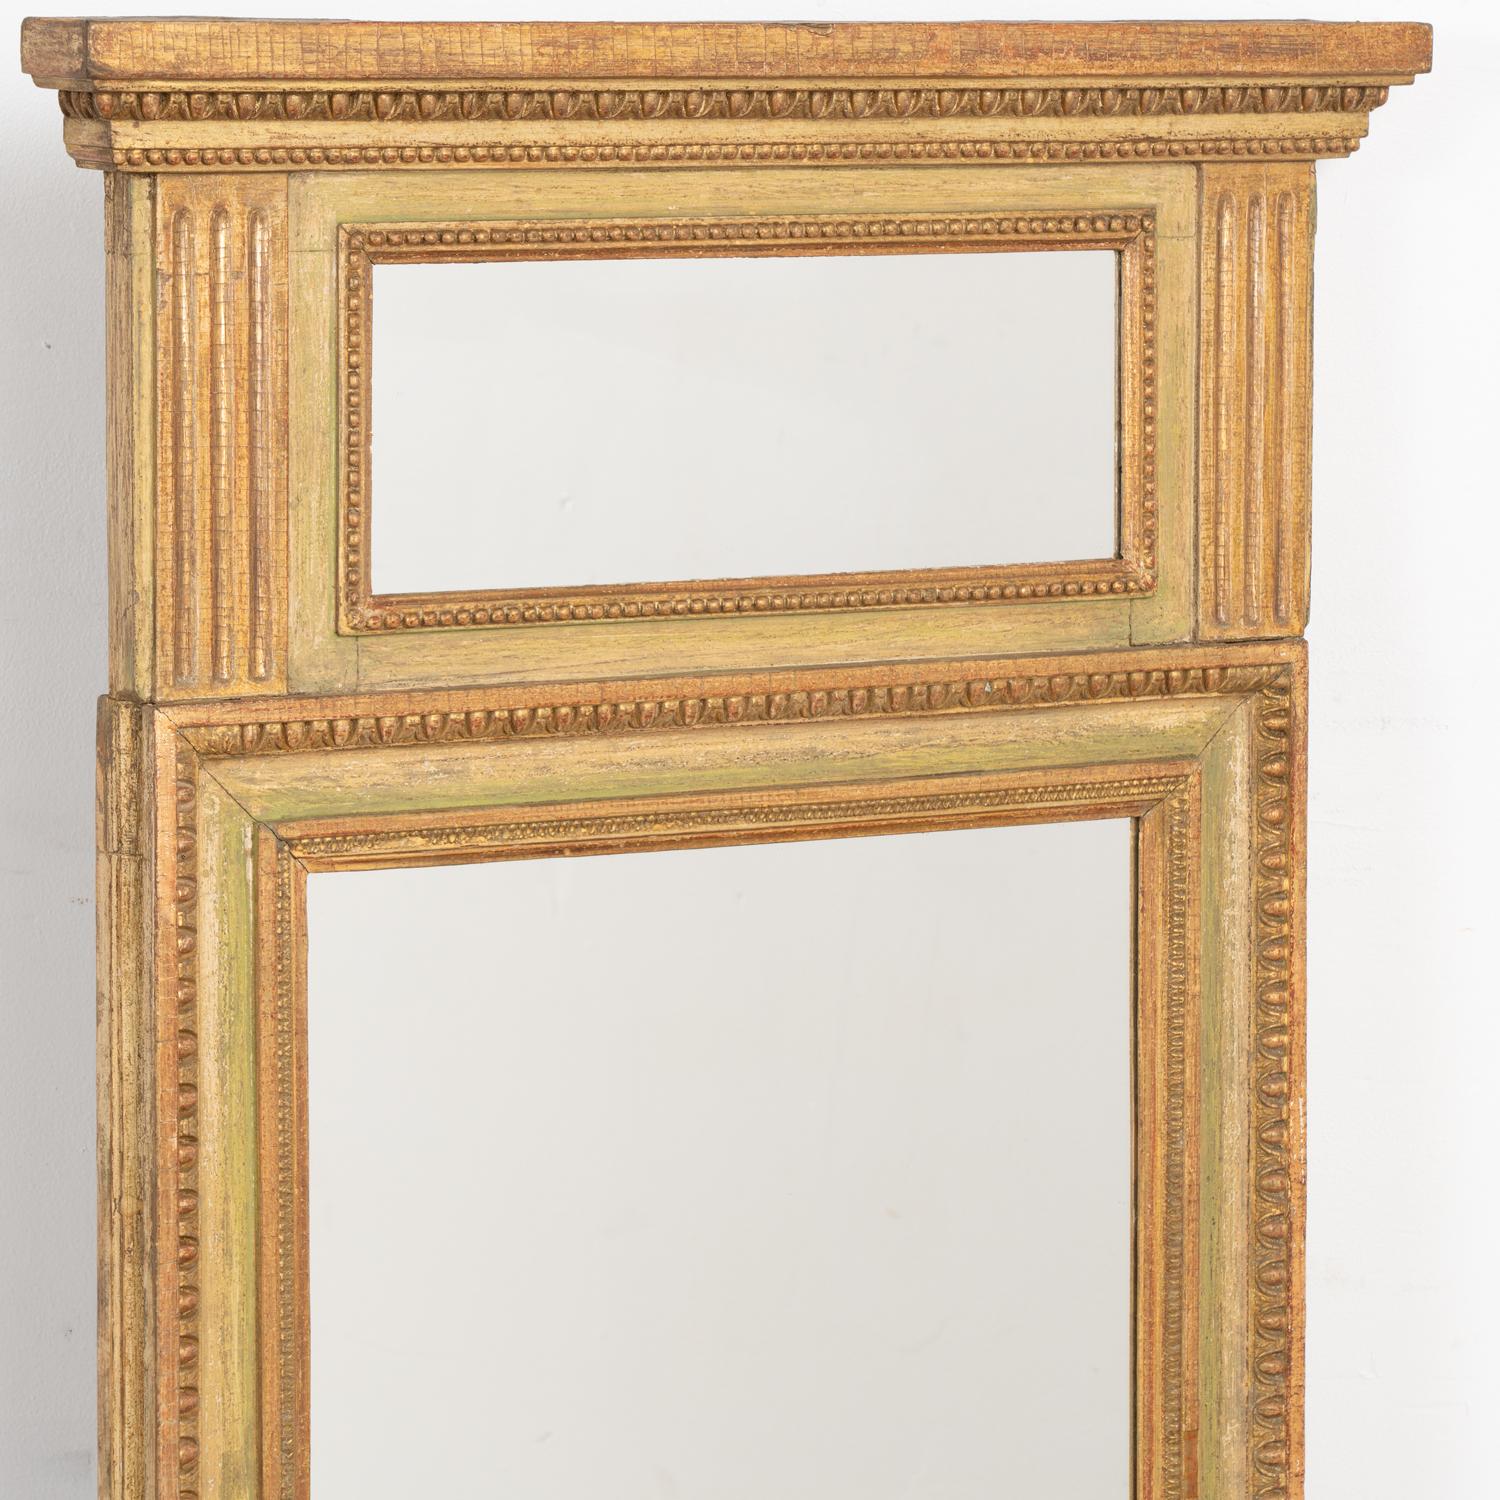 Swedish Gold and Green Painted Trumeau Mirror, Sweden circa 1820-40 For Sale